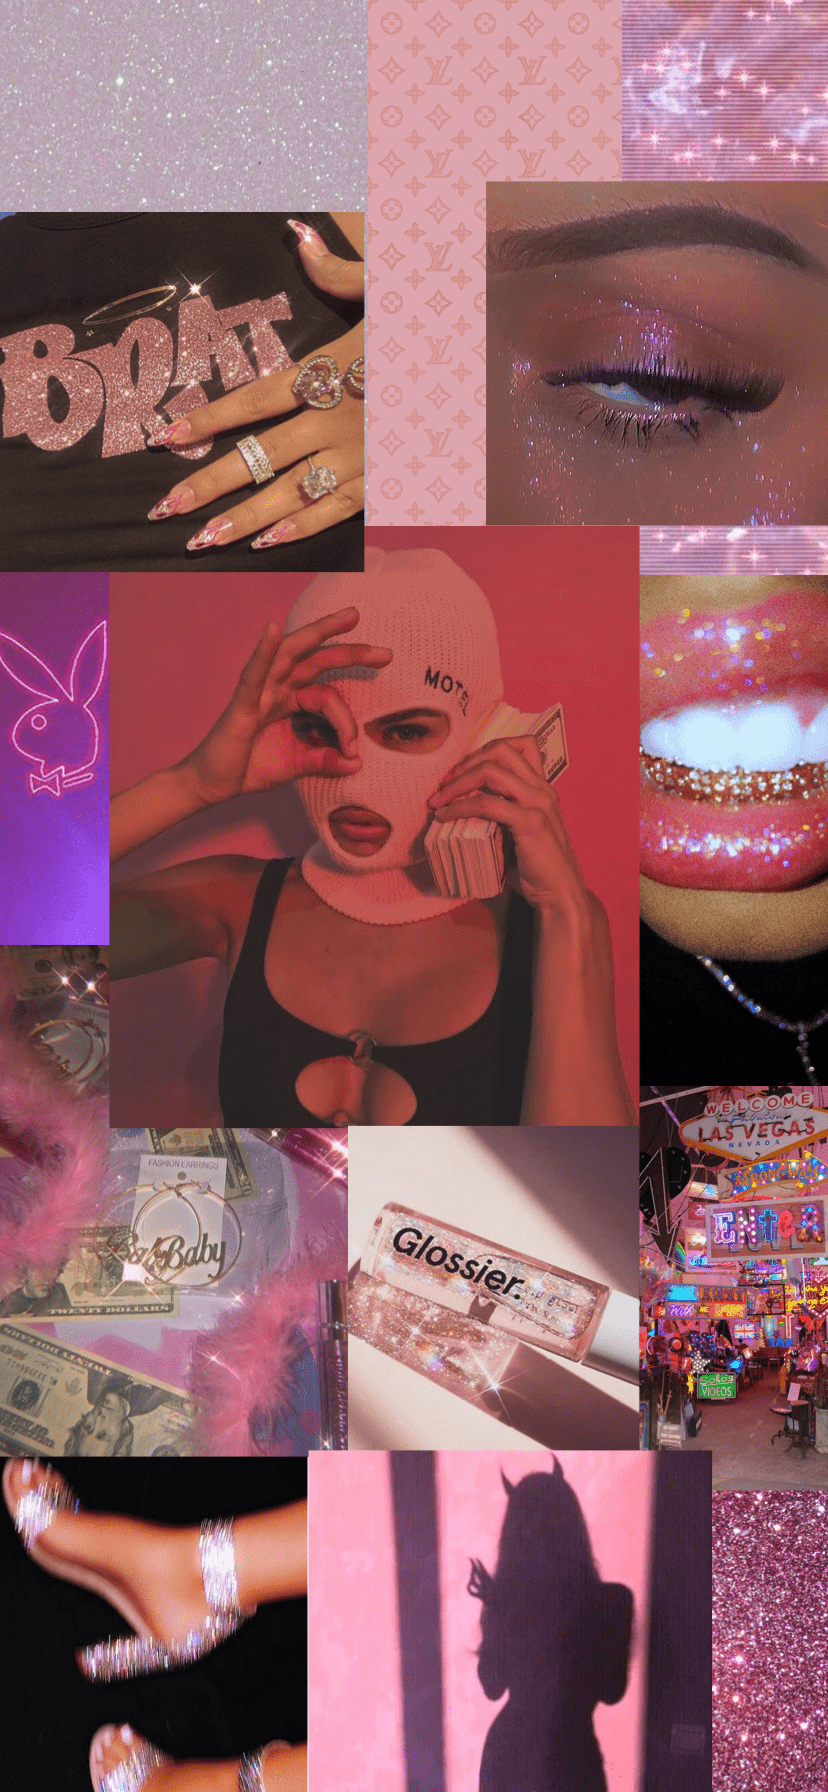 Aesthetic collage of pink and purple images including money, lips, and a woman with a pink mask - Baddie, Las Vegas